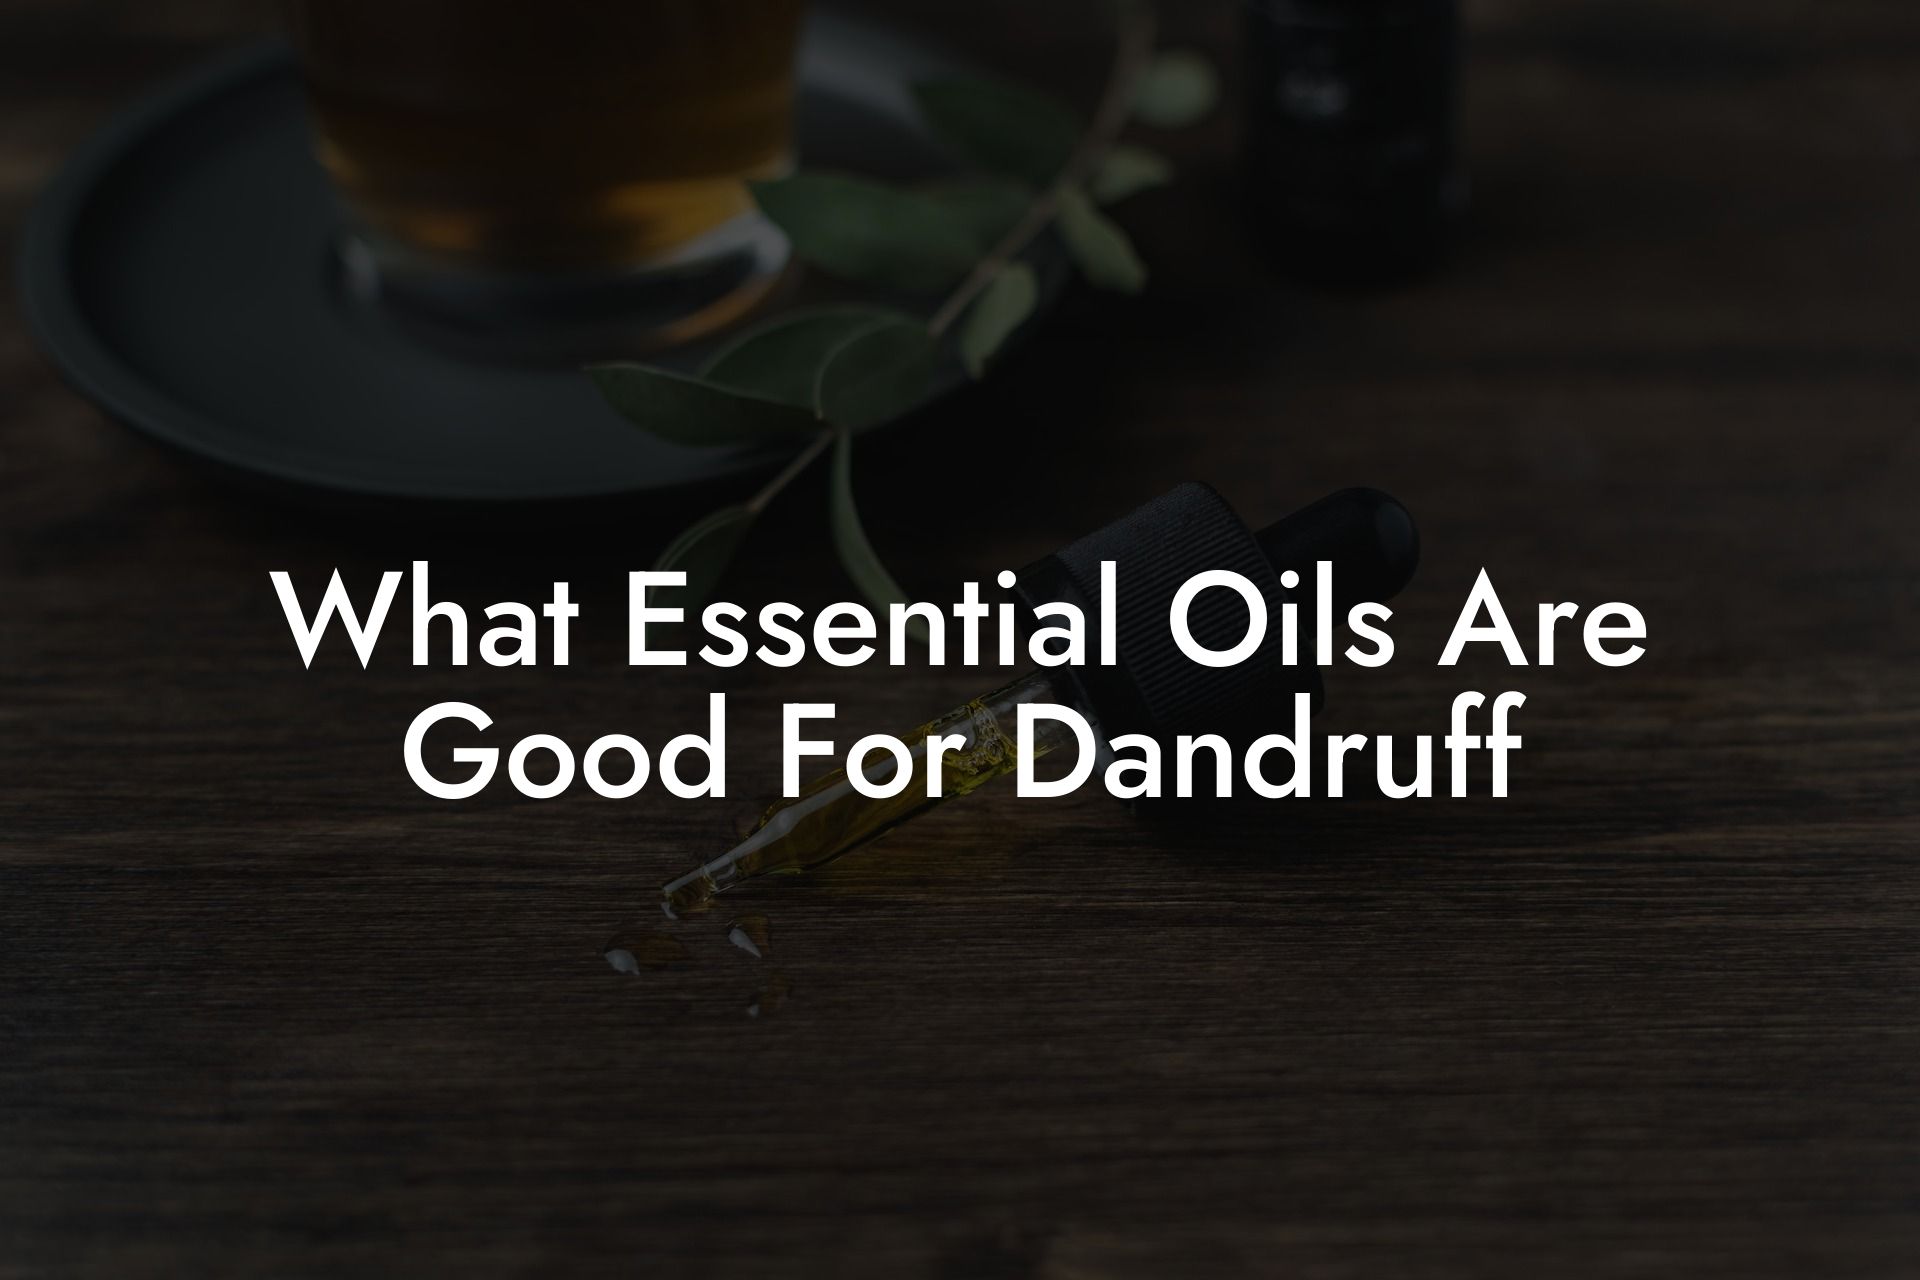 What Essential Oils Are Good For Dandruff